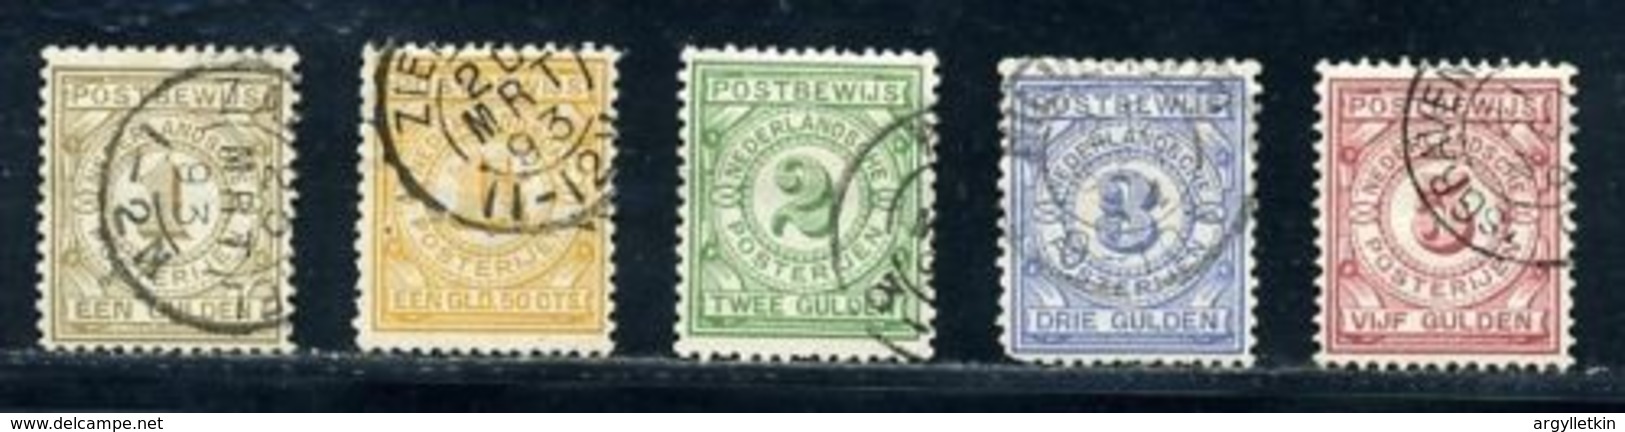 NETHERLANDS 1884 MONEY ORDER STAMPS - Fiscales